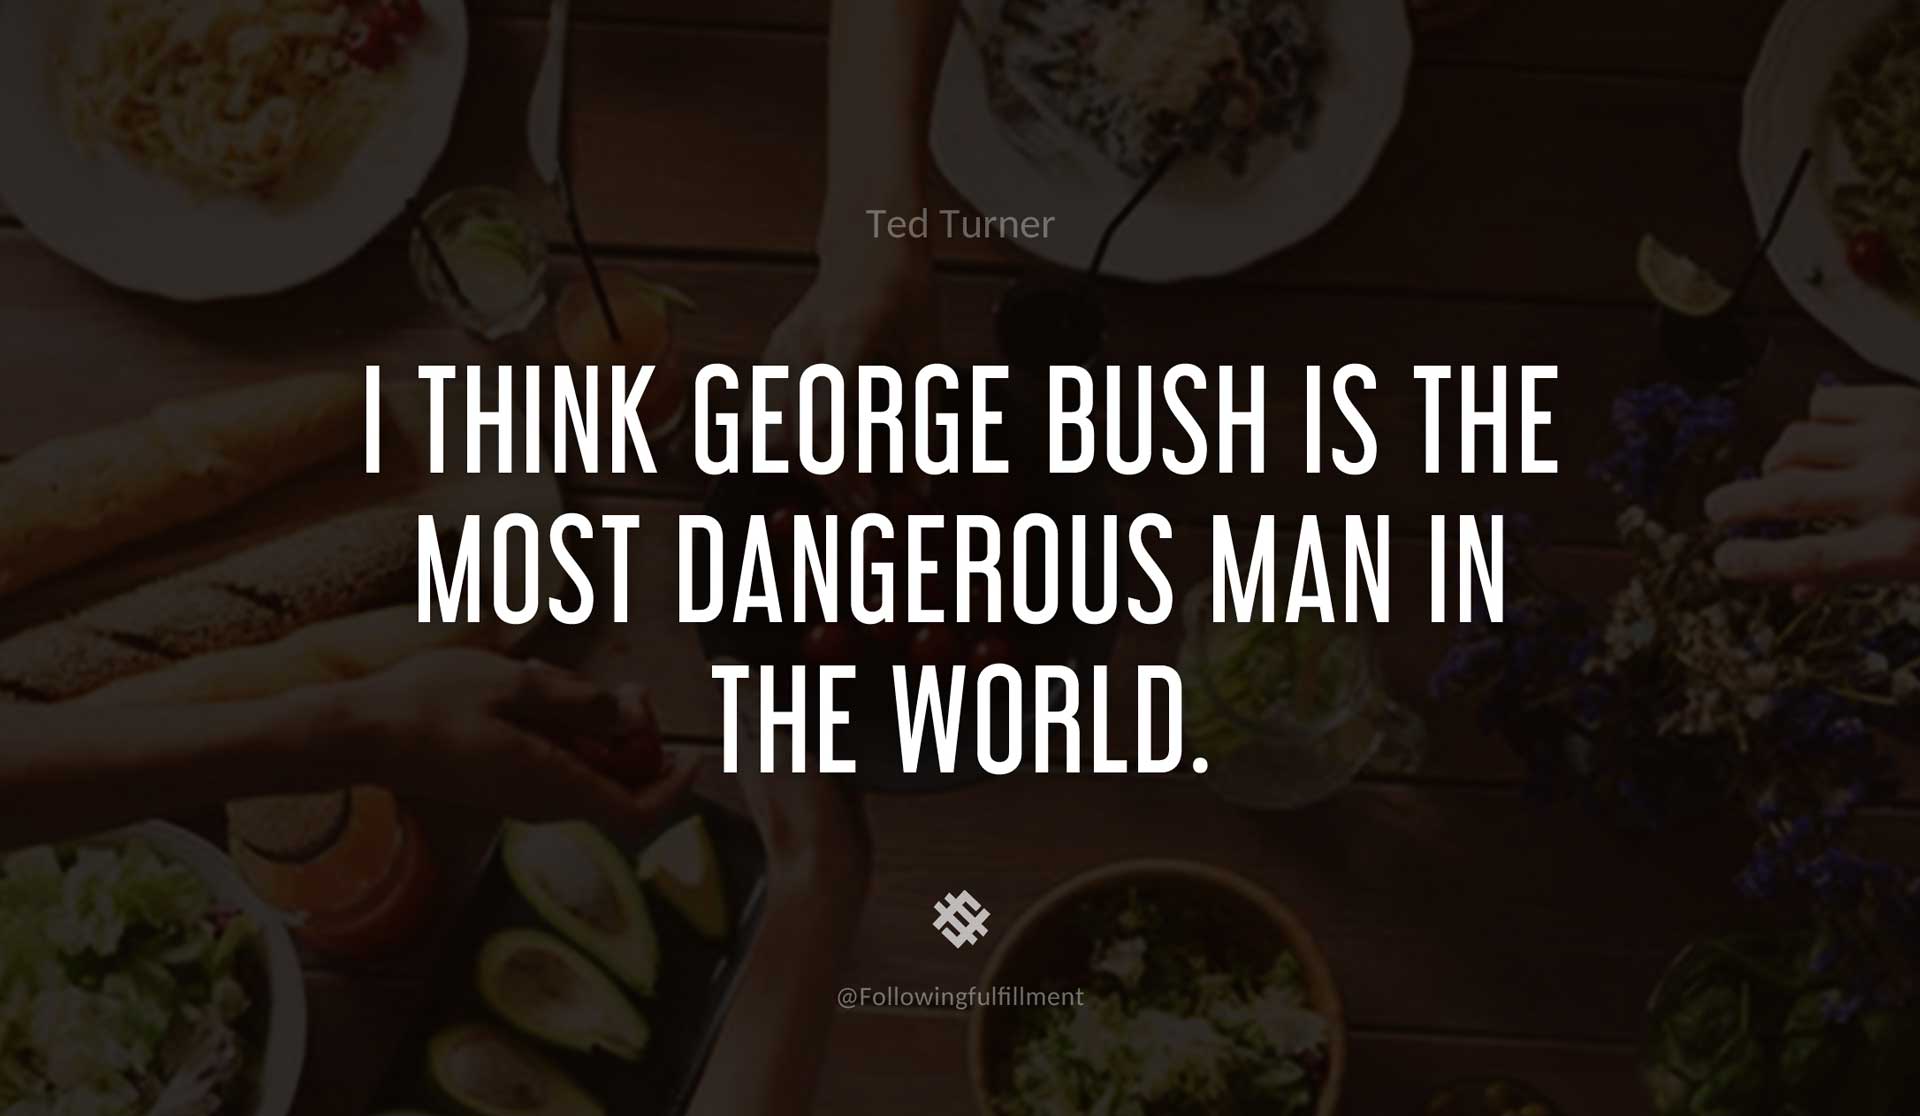 I-think-George-Bush-is-the-most-dangerous-man-in-the-world.-TED-TURNER-Quote.jpg